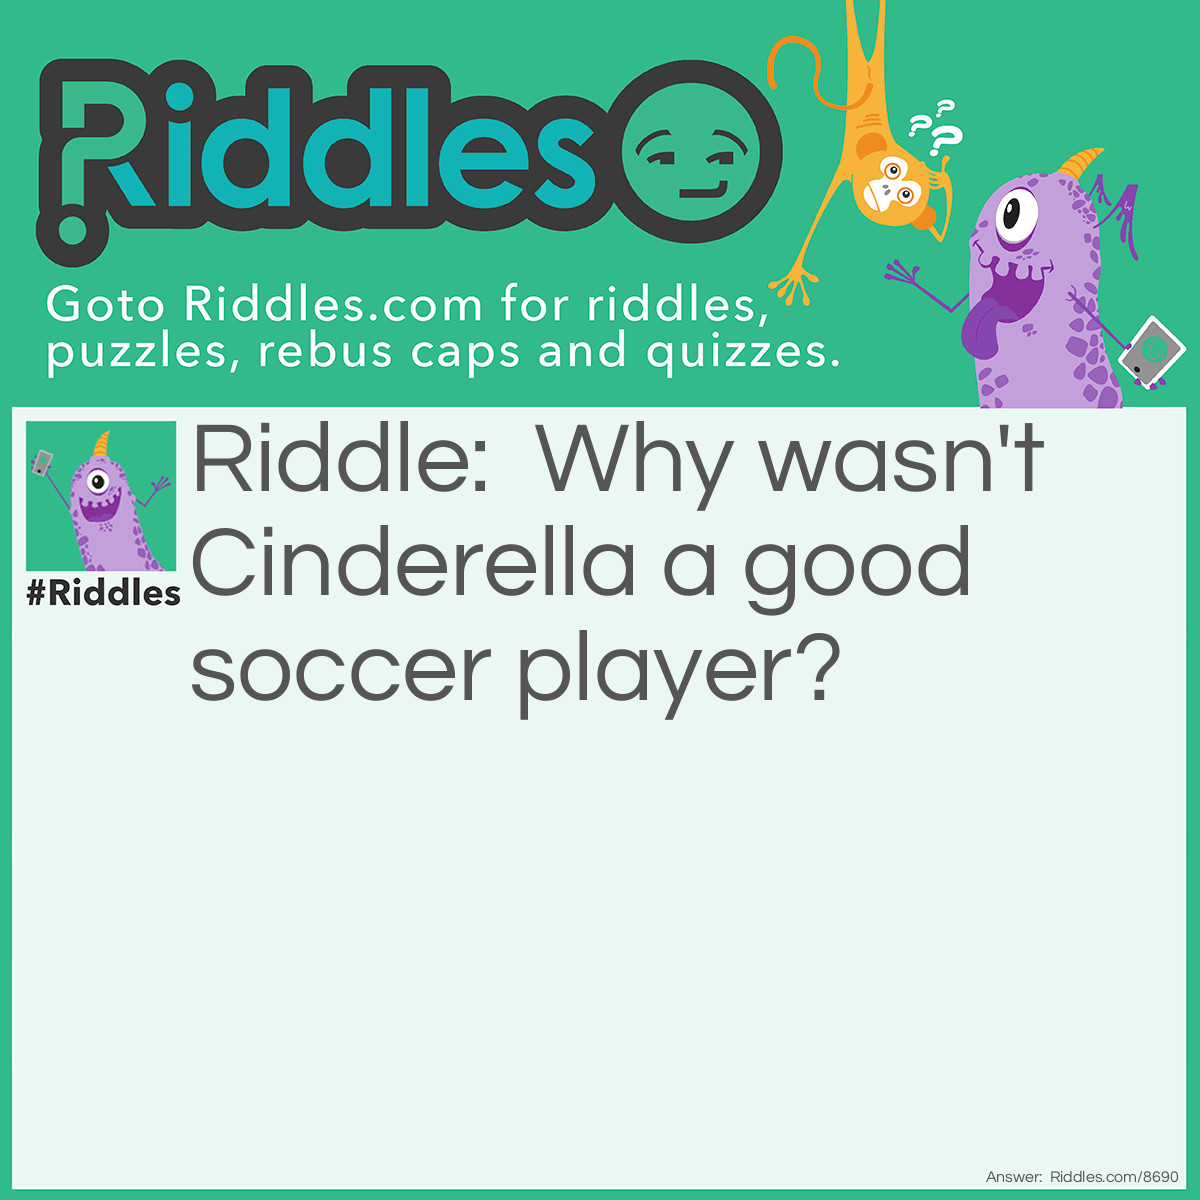 Riddle: Why wasn't Cinderella a good soccer player? Answer: She lost her shoe, she ran away from the ball, and her coach was a pumpkin!